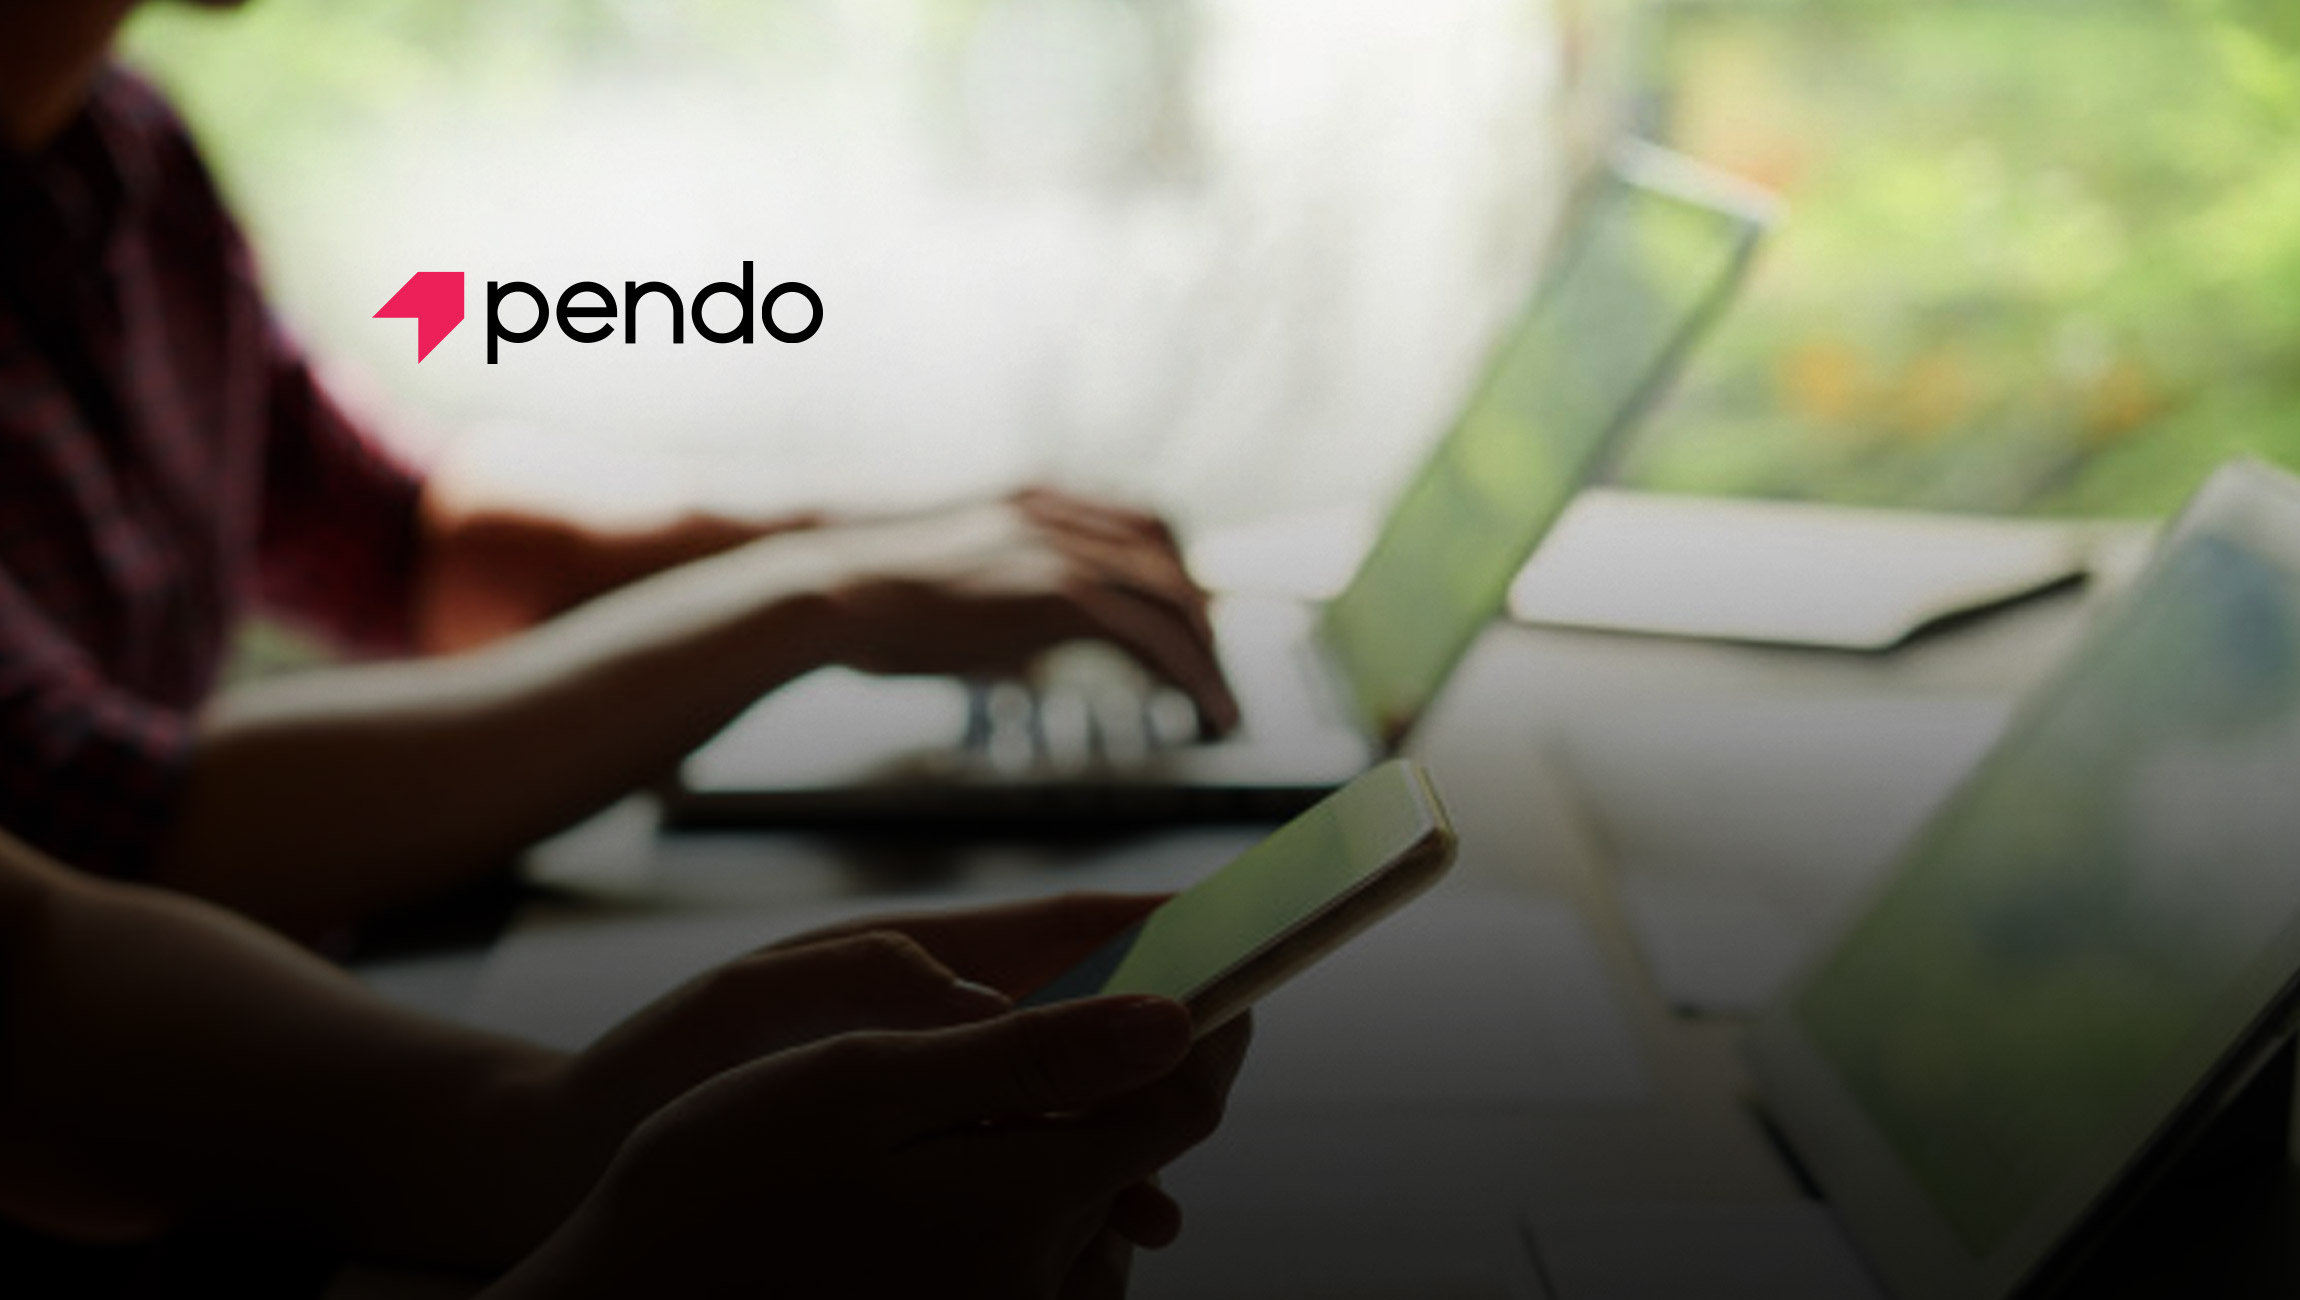 Pendo Announces Pendo Free, Giving More Product Teams Access to Foundational Tools for Creating Great Products